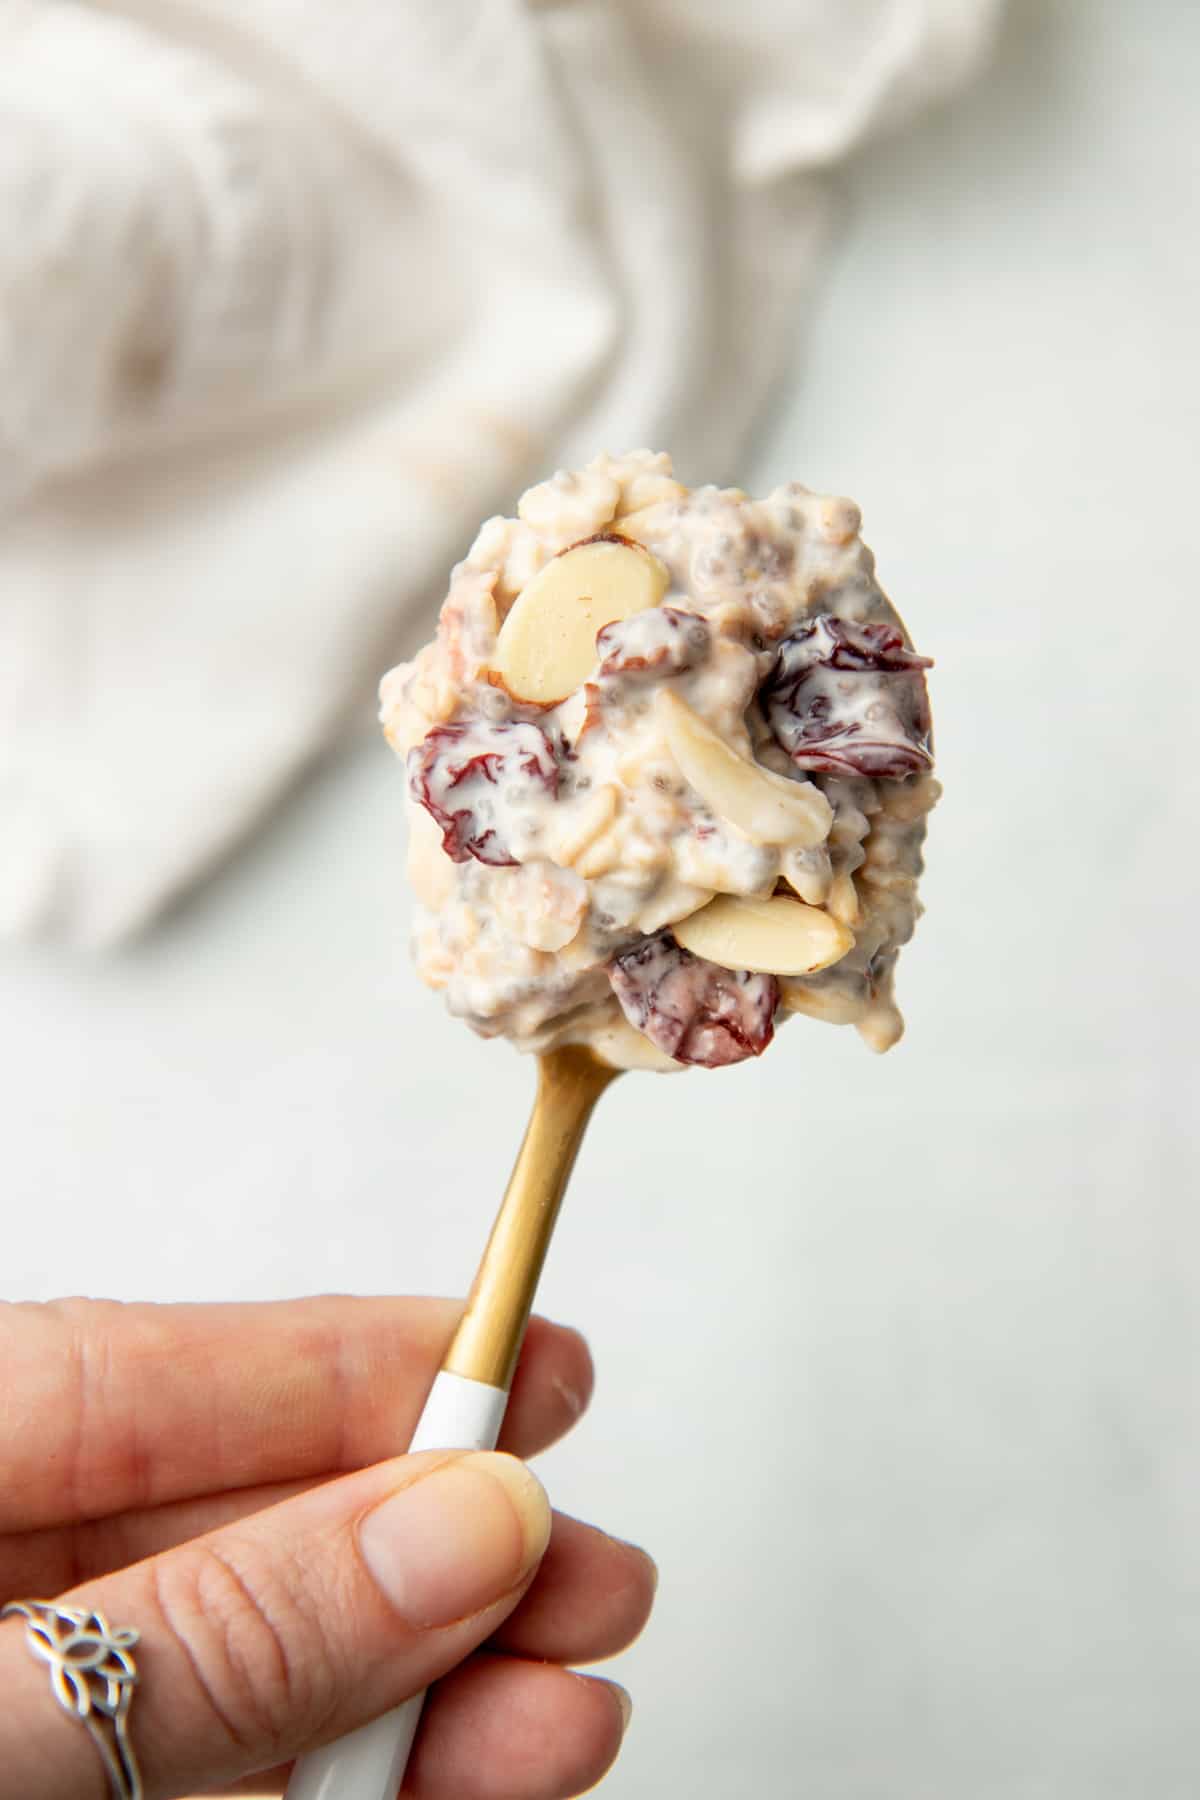 A hand holds a spoon loaded with overnight oatmeal.